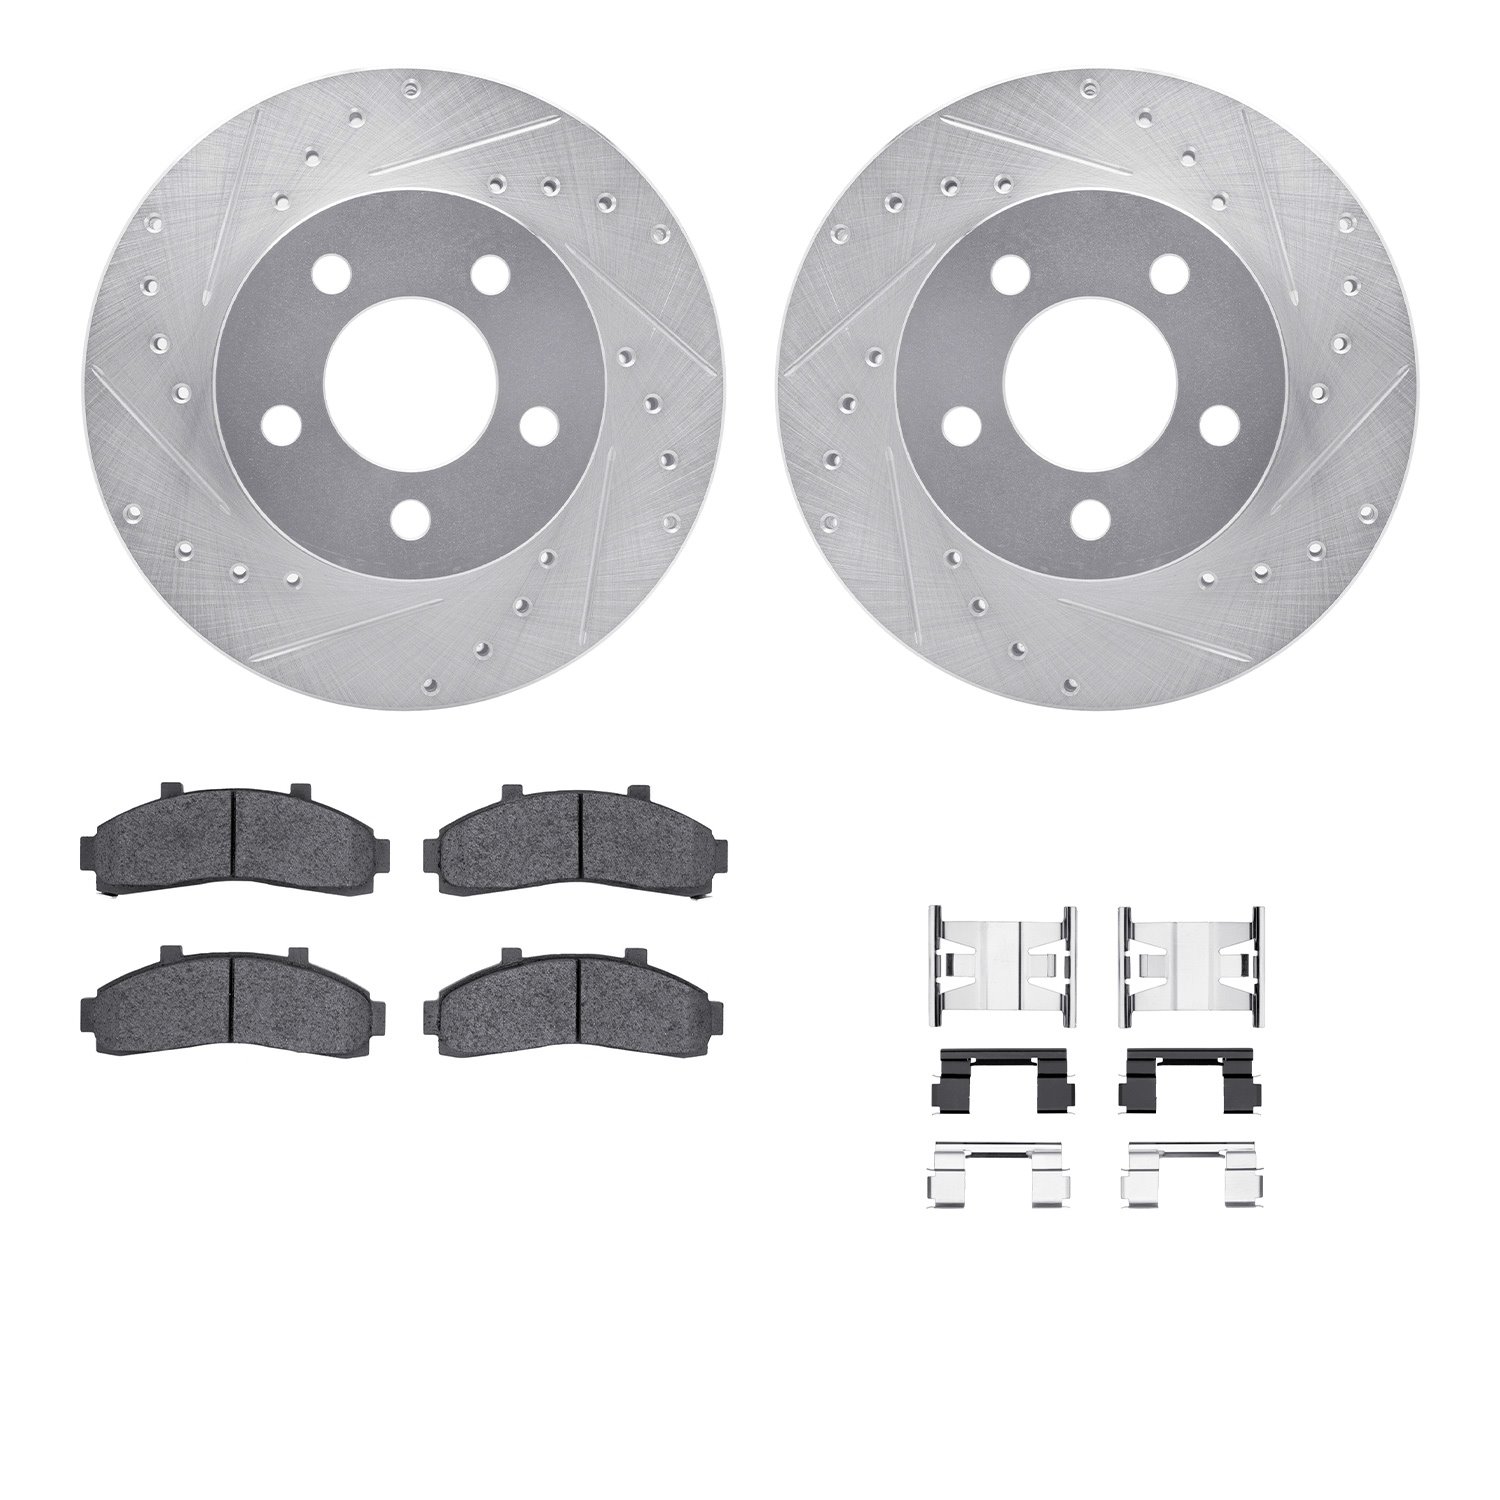 7412-54032 Drilled/Slotted Brake Rotors with Ultimate-Duty Brake Pads Kit & Hardware [Silver], 1995-2002 Ford/Lincoln/Mercury/Ma